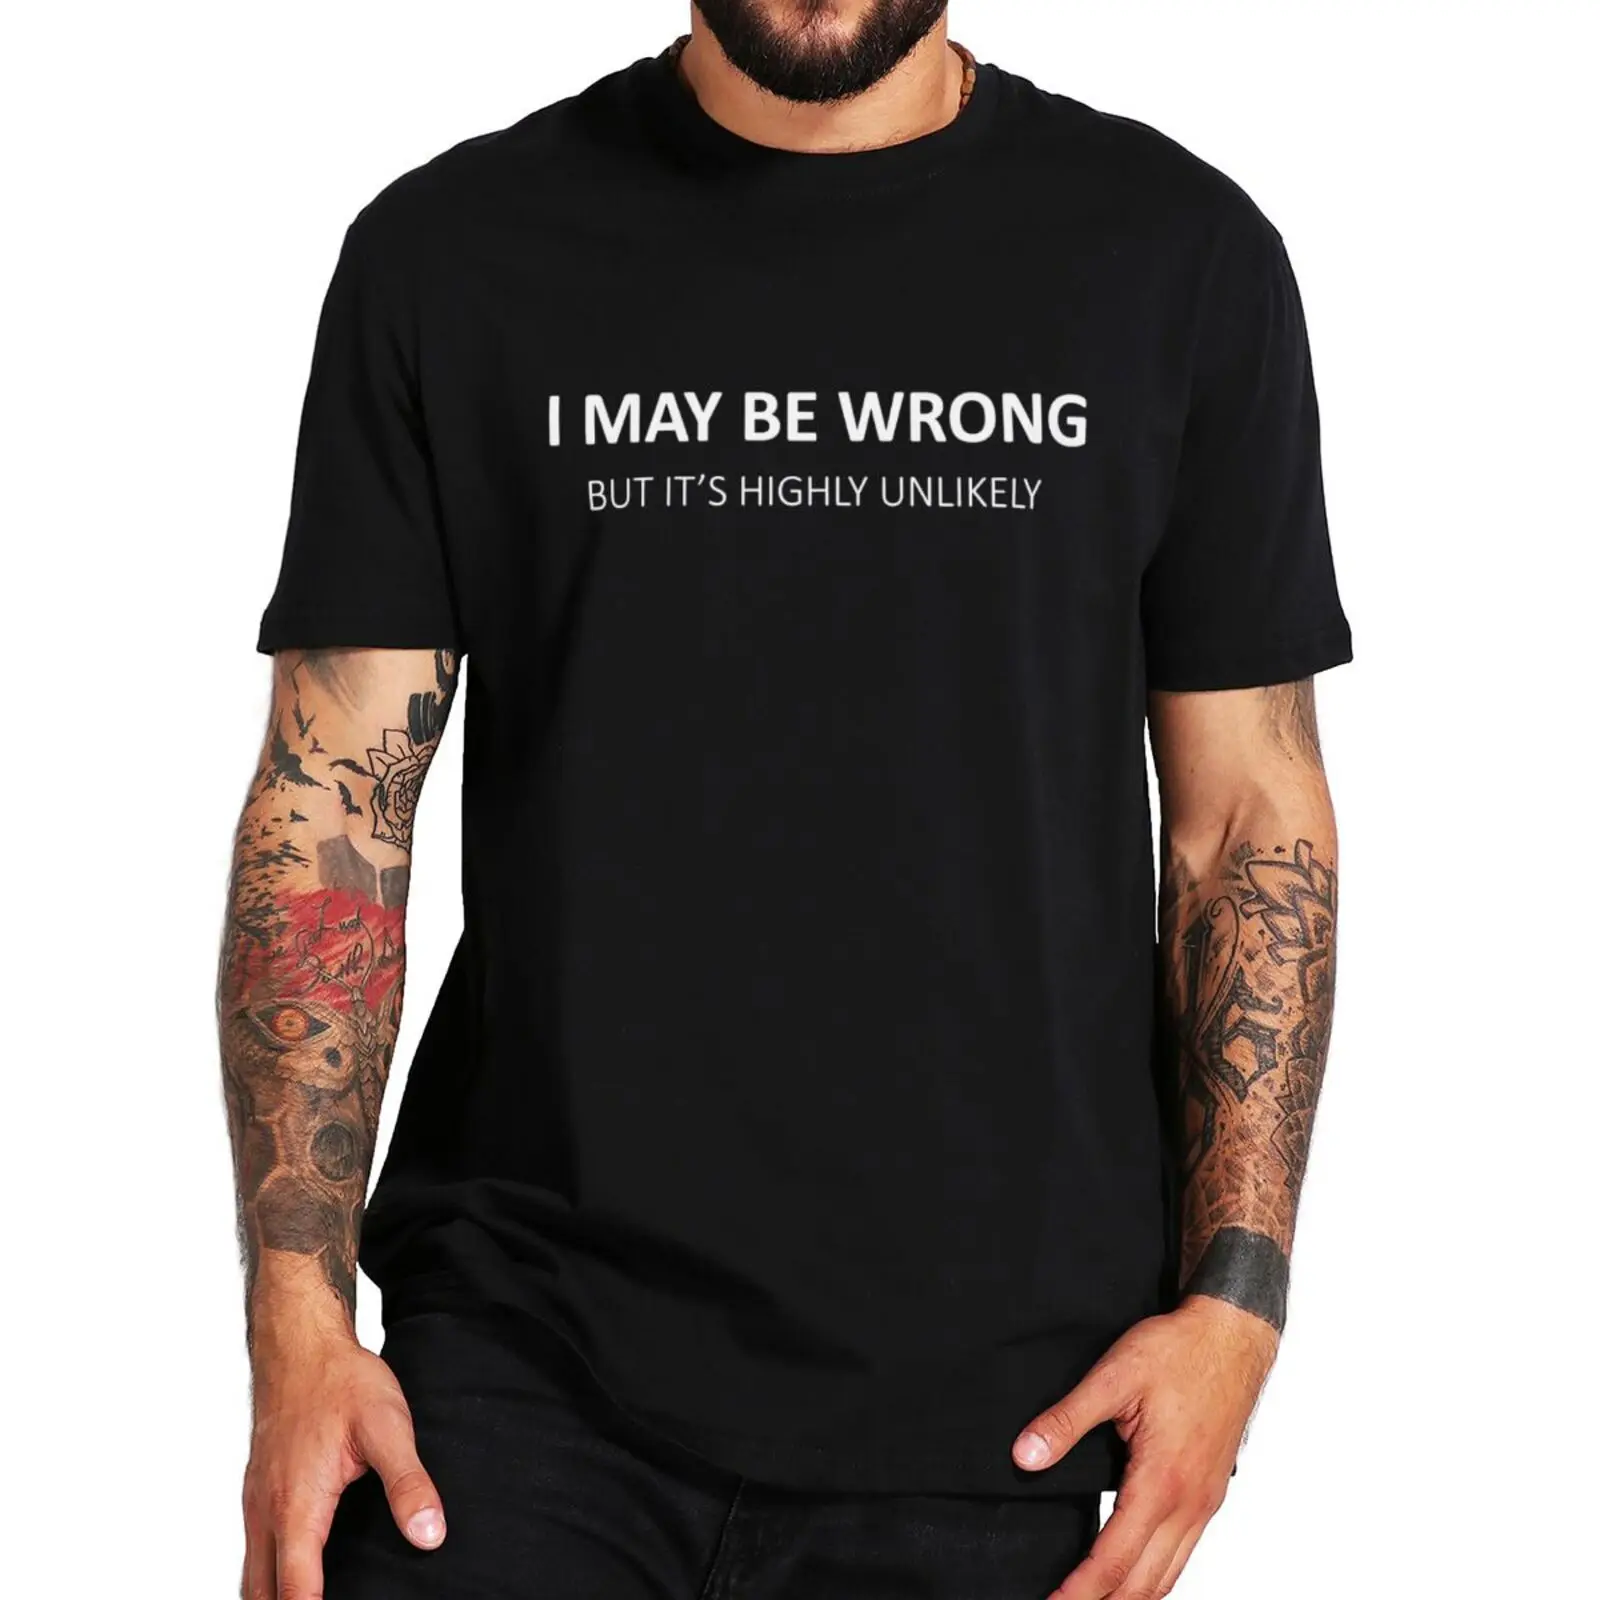 

I Maybe Wrong But It's Highly Unlikely T Shirt Sarcastic Quote Fashion Trending Tee Tops Casual 100% Cotton Unisex T-Shirt